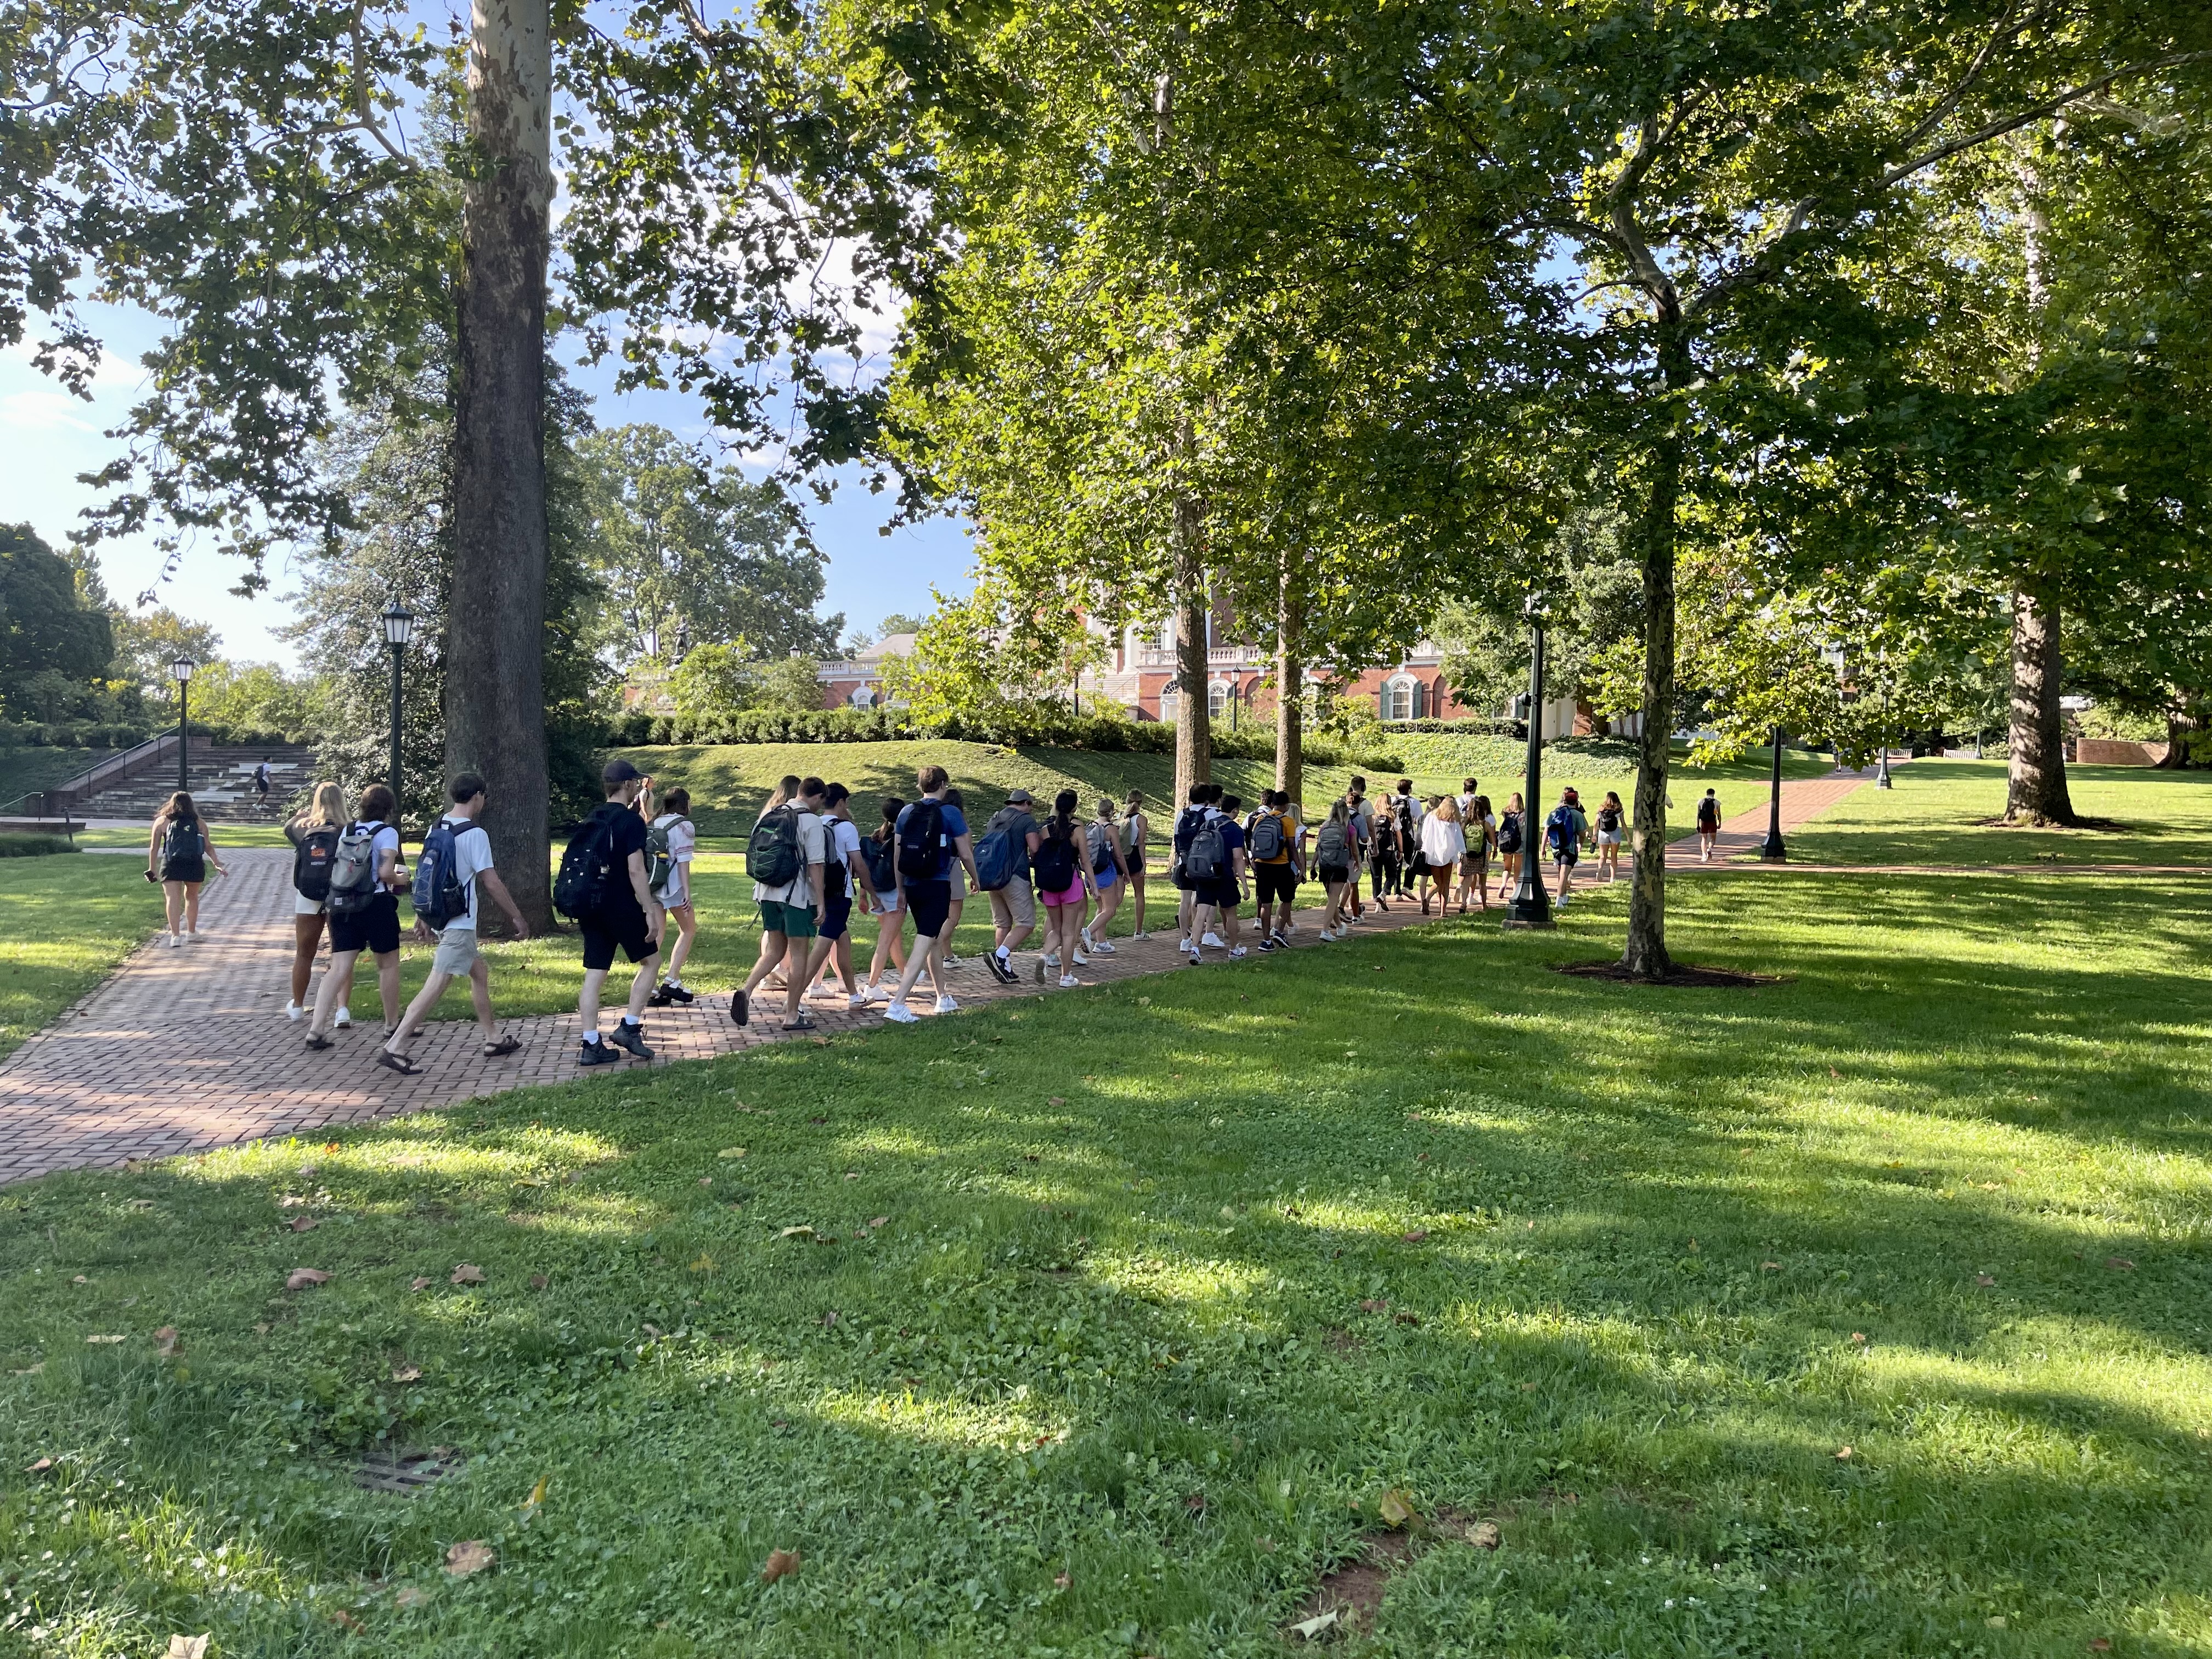 students walking to the first day of classes, August 23, 2022